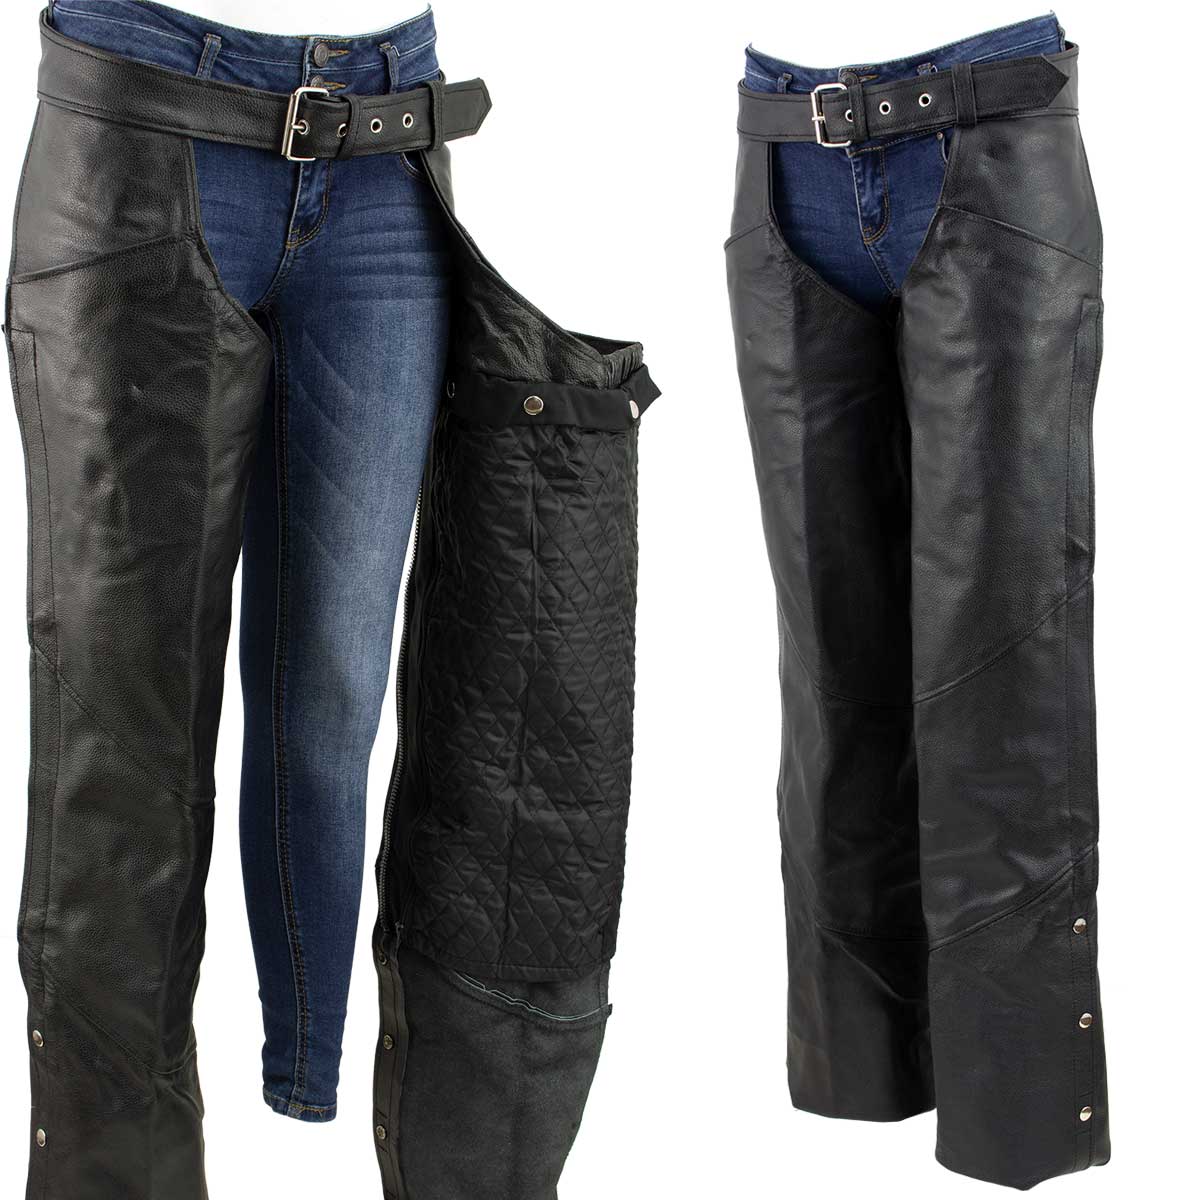 Unisex XS462 Tall-Size Black Thermal Lined Leather Motorcycle Chaps